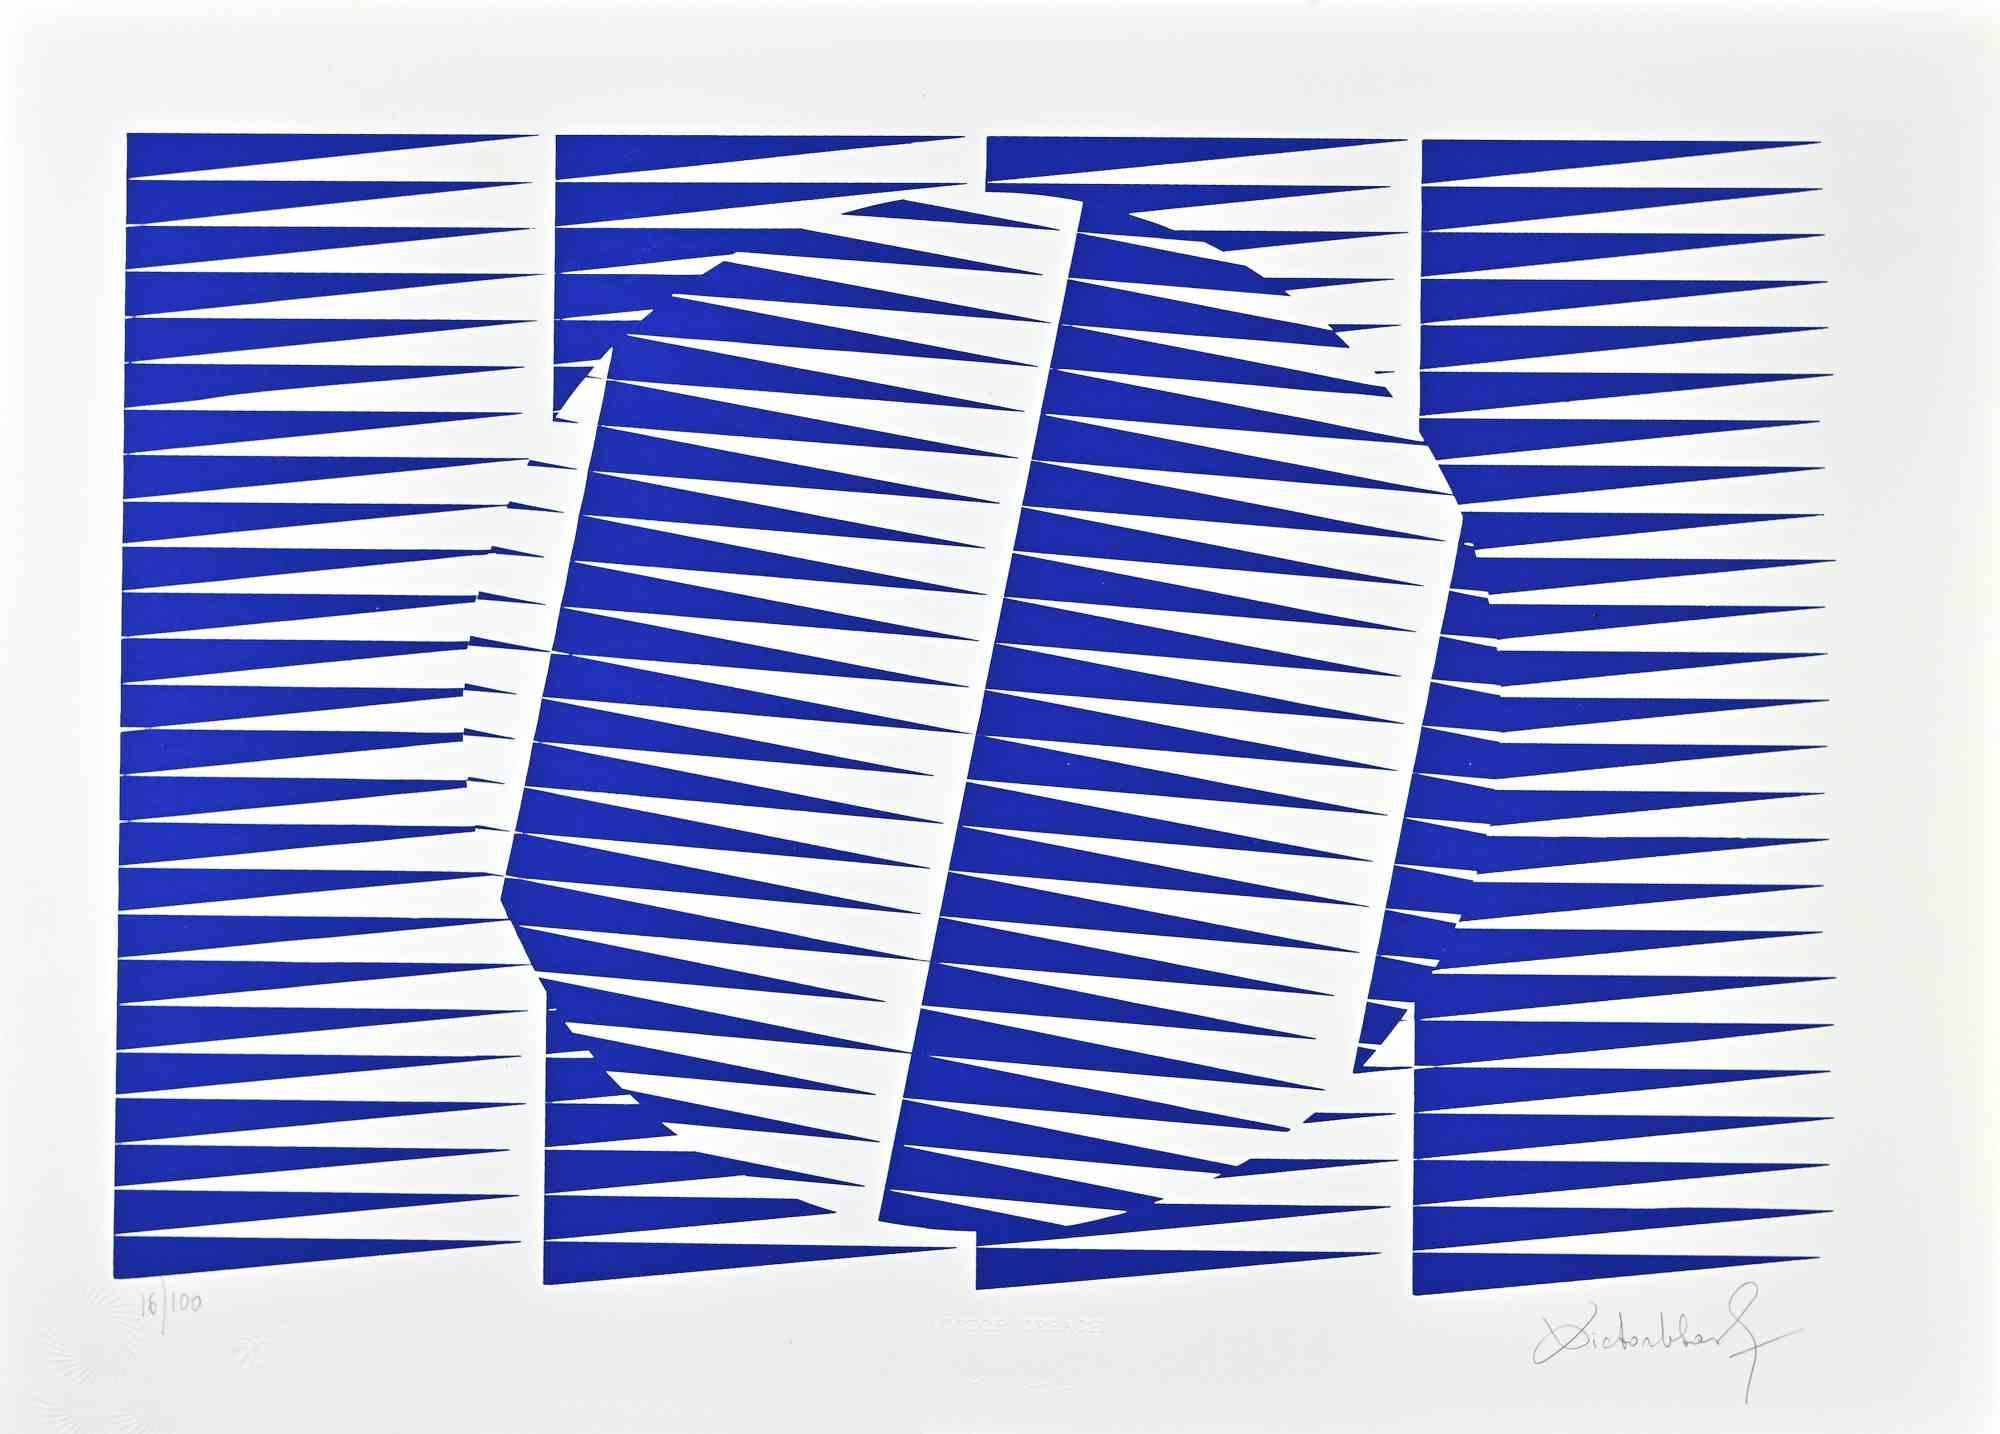 Abstract Electric Blue Composition is a screen Print on Paper realized by Victor Debach in the 1970s.

Limited edition of 100 copies numbered and signed by the artist with pencil on the lower margin.

Edition 16/100

Very good condition on white